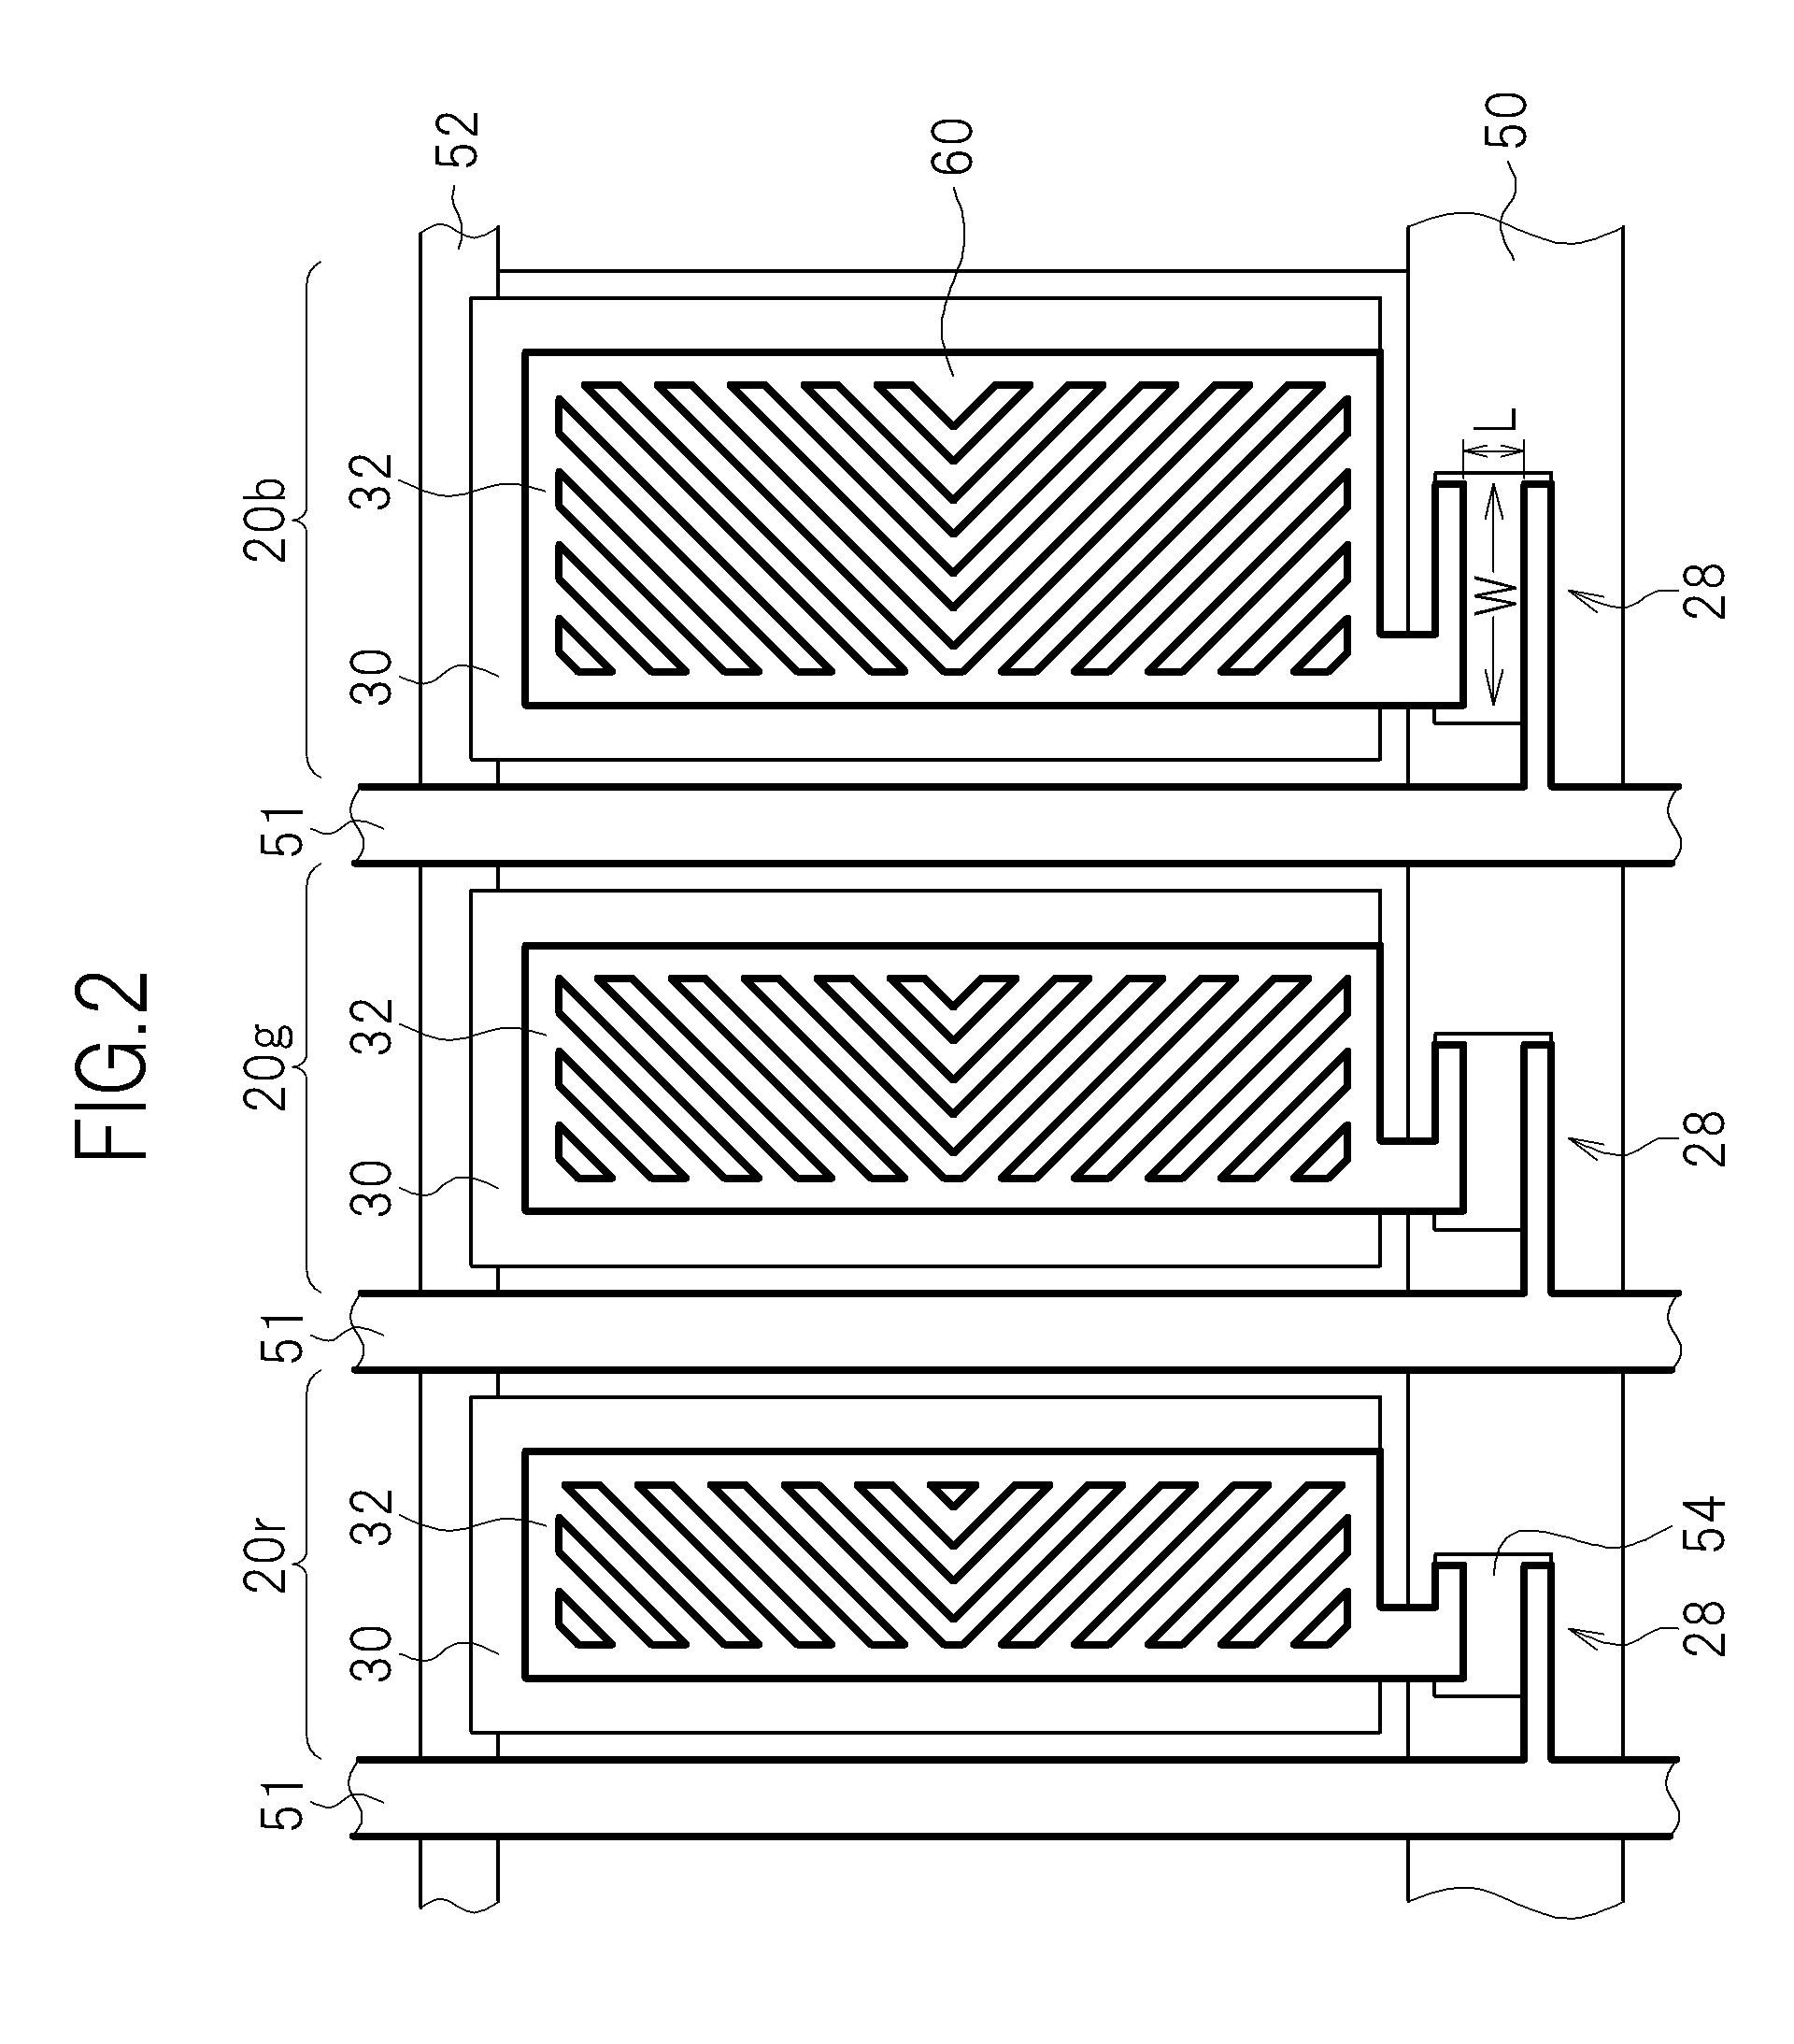 Liquid crystal display device with red, green and blue subpixels having different aperture ratios